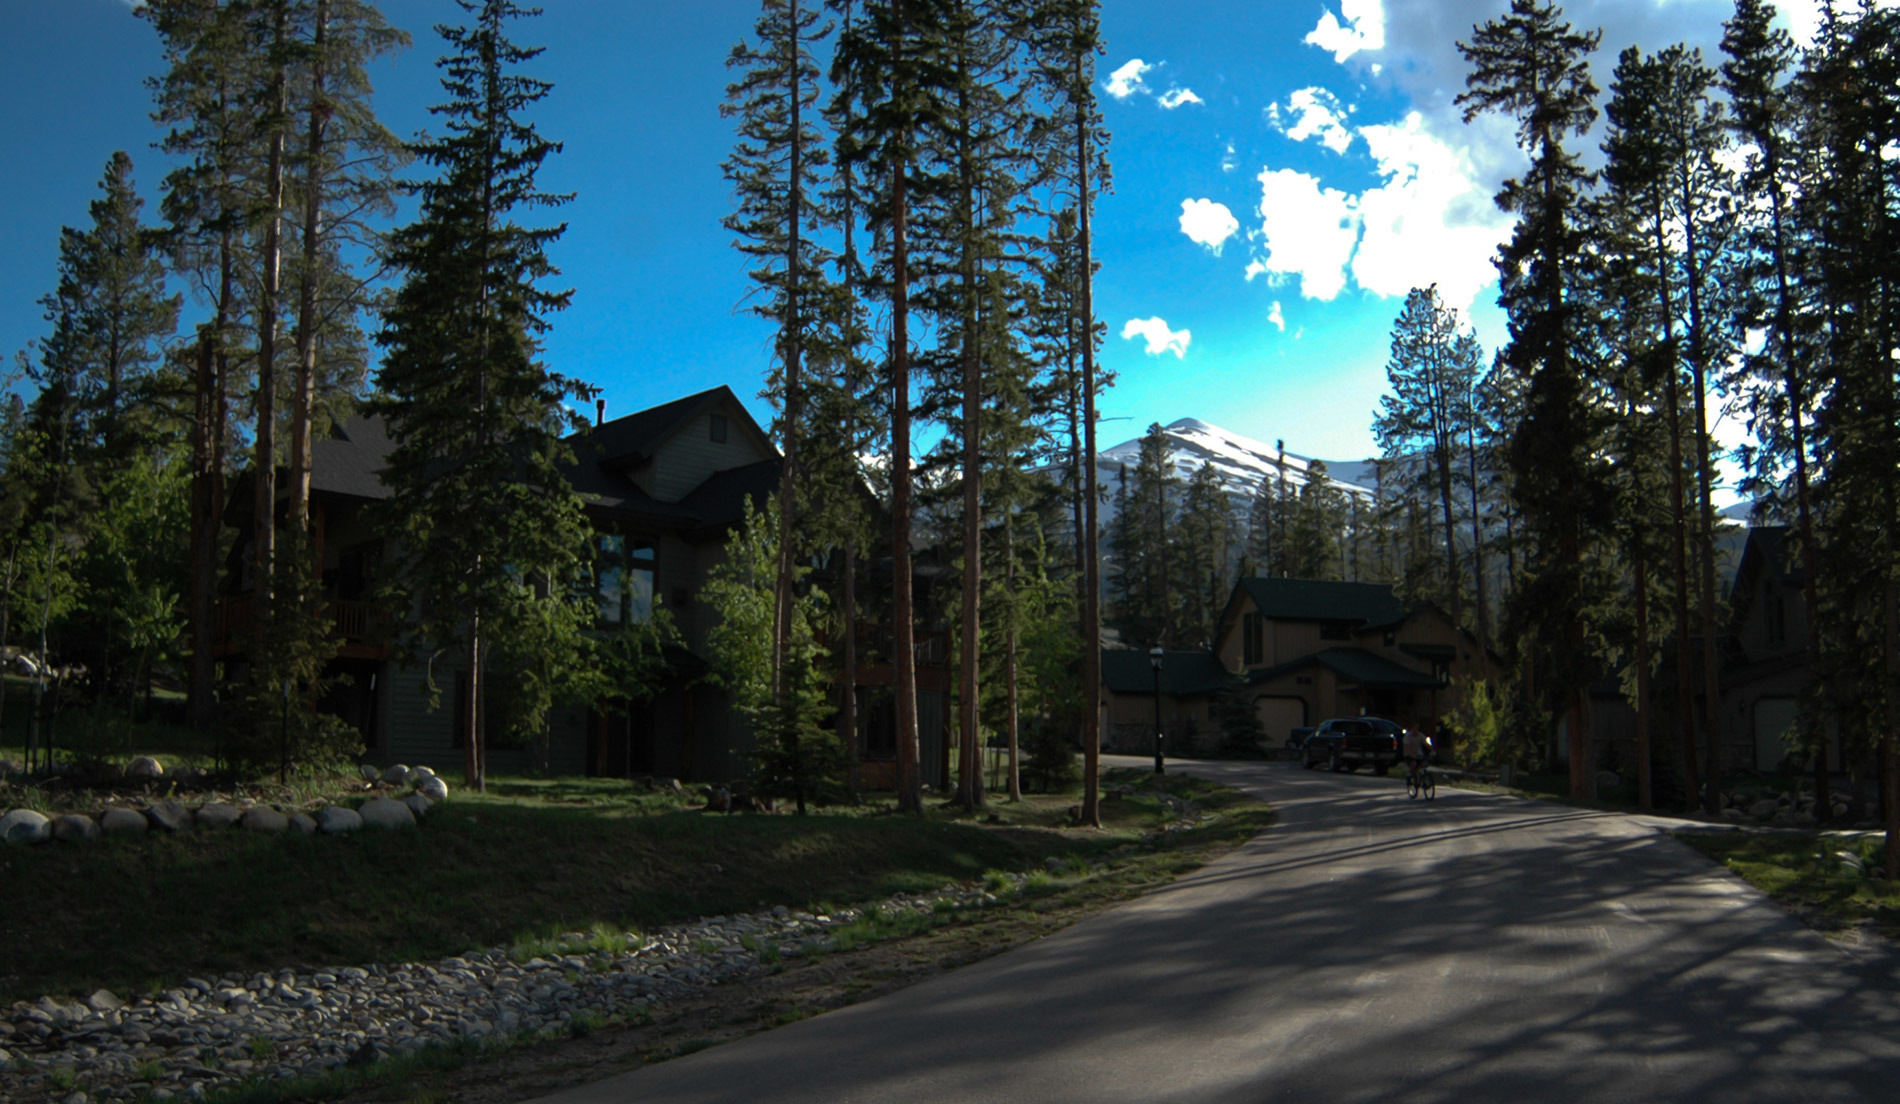 White Wolf Townhomes in Breckenridge Colorado at the base of Peak 8